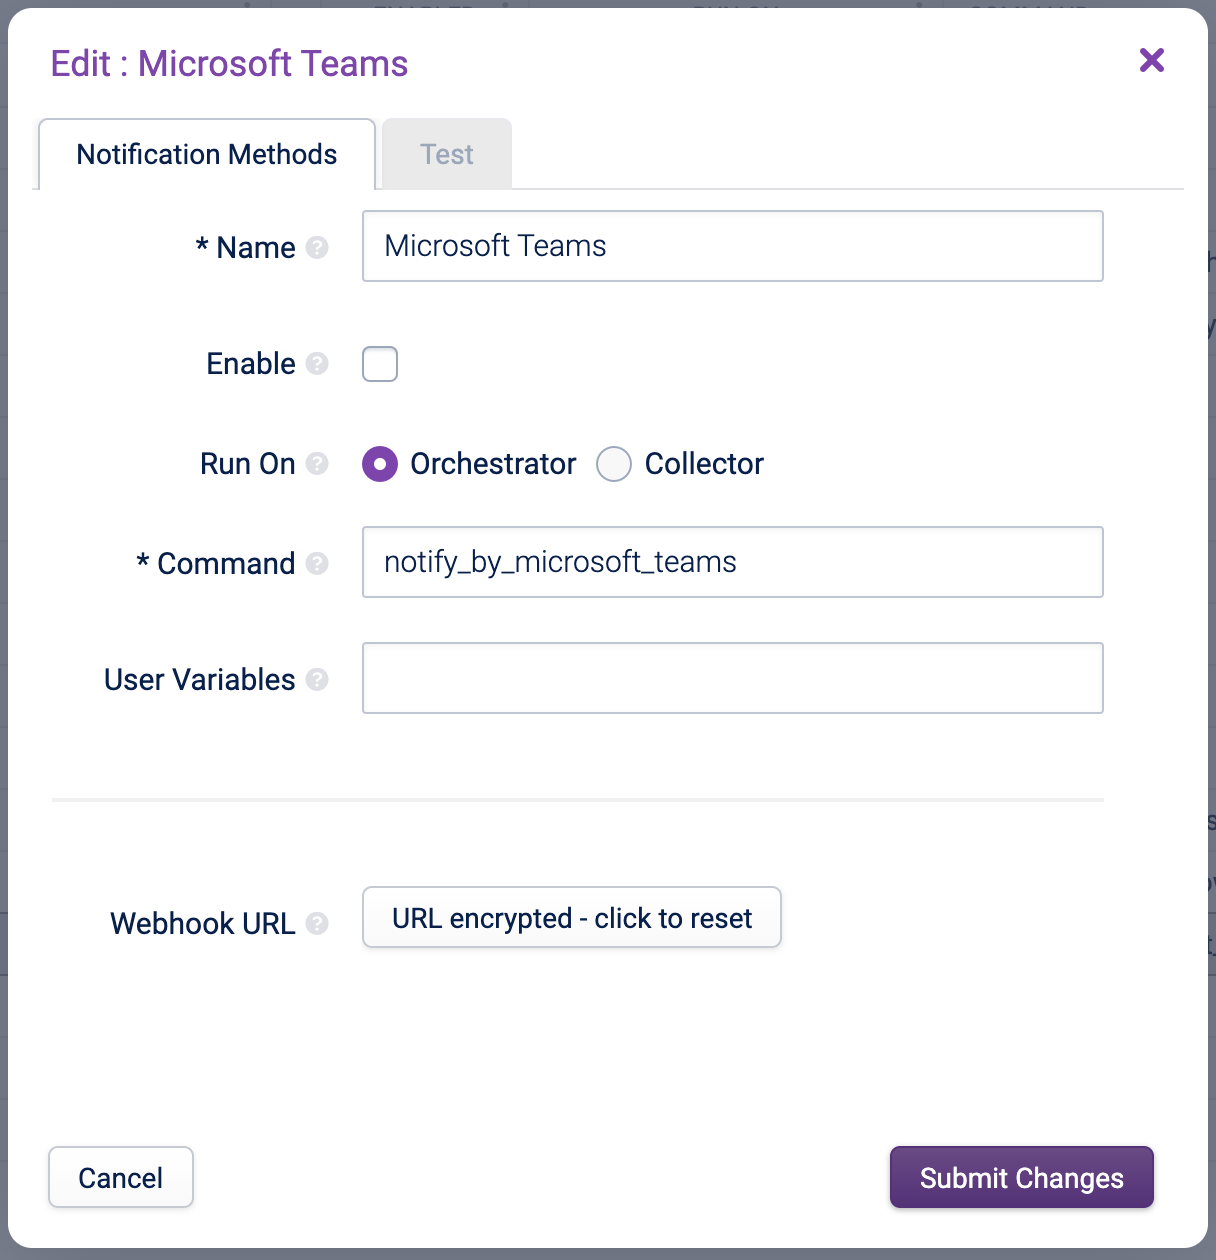 Add the Microsoft Teams notification method to Opsview